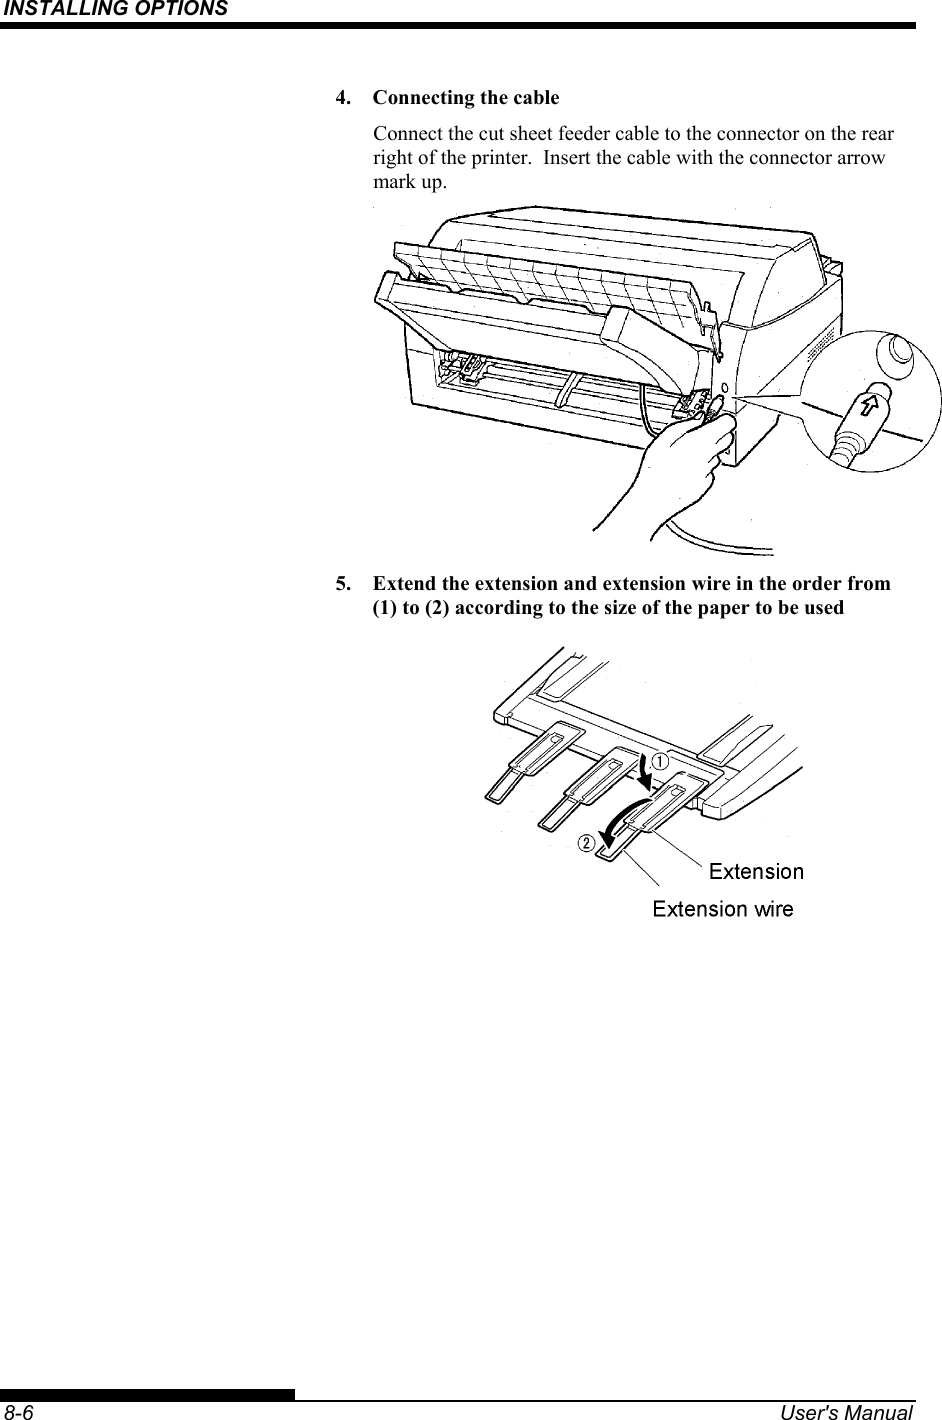 INSTALLING OPTIONS    8-6  User&apos;s Manual 4.  Connecting the cable Connect the cut sheet feeder cable to the connector on the rear right of the printer.  Insert the cable with the connector arrow mark up.  5.  Extend the extension and extension wire in the order from (1) to (2) according to the size of the paper to be used  